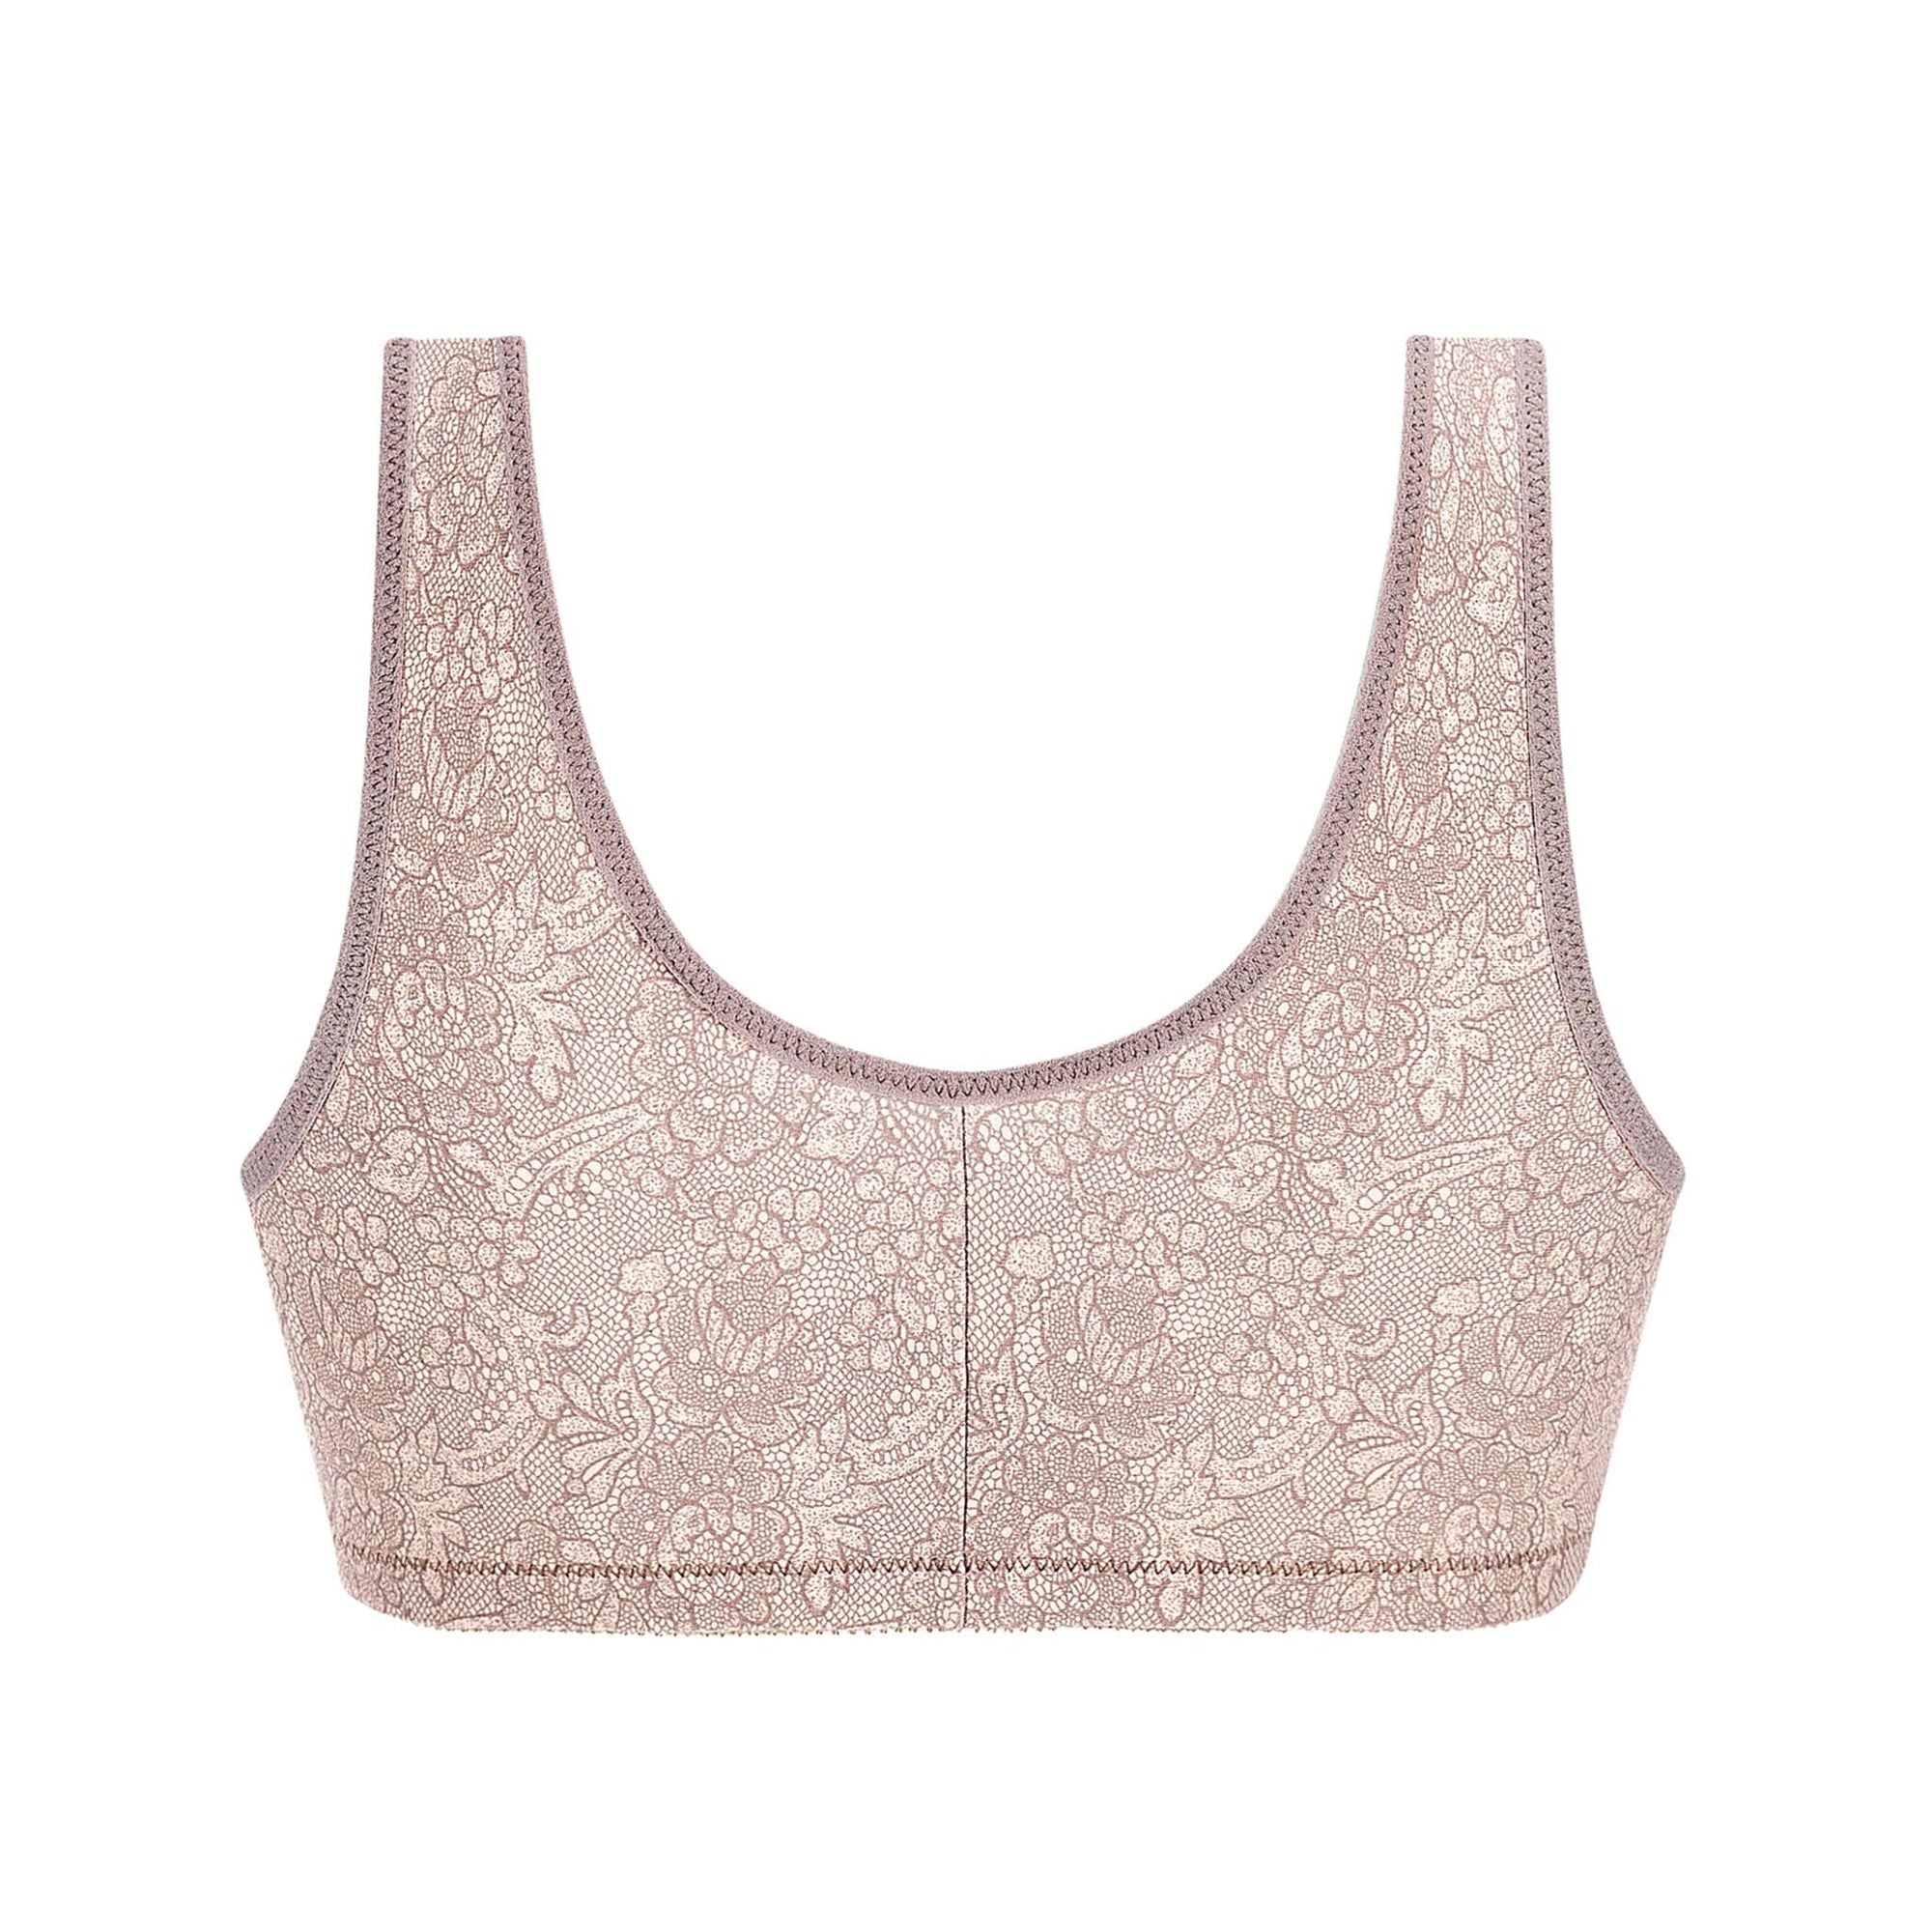 Shown in Taupe Lace-Back View